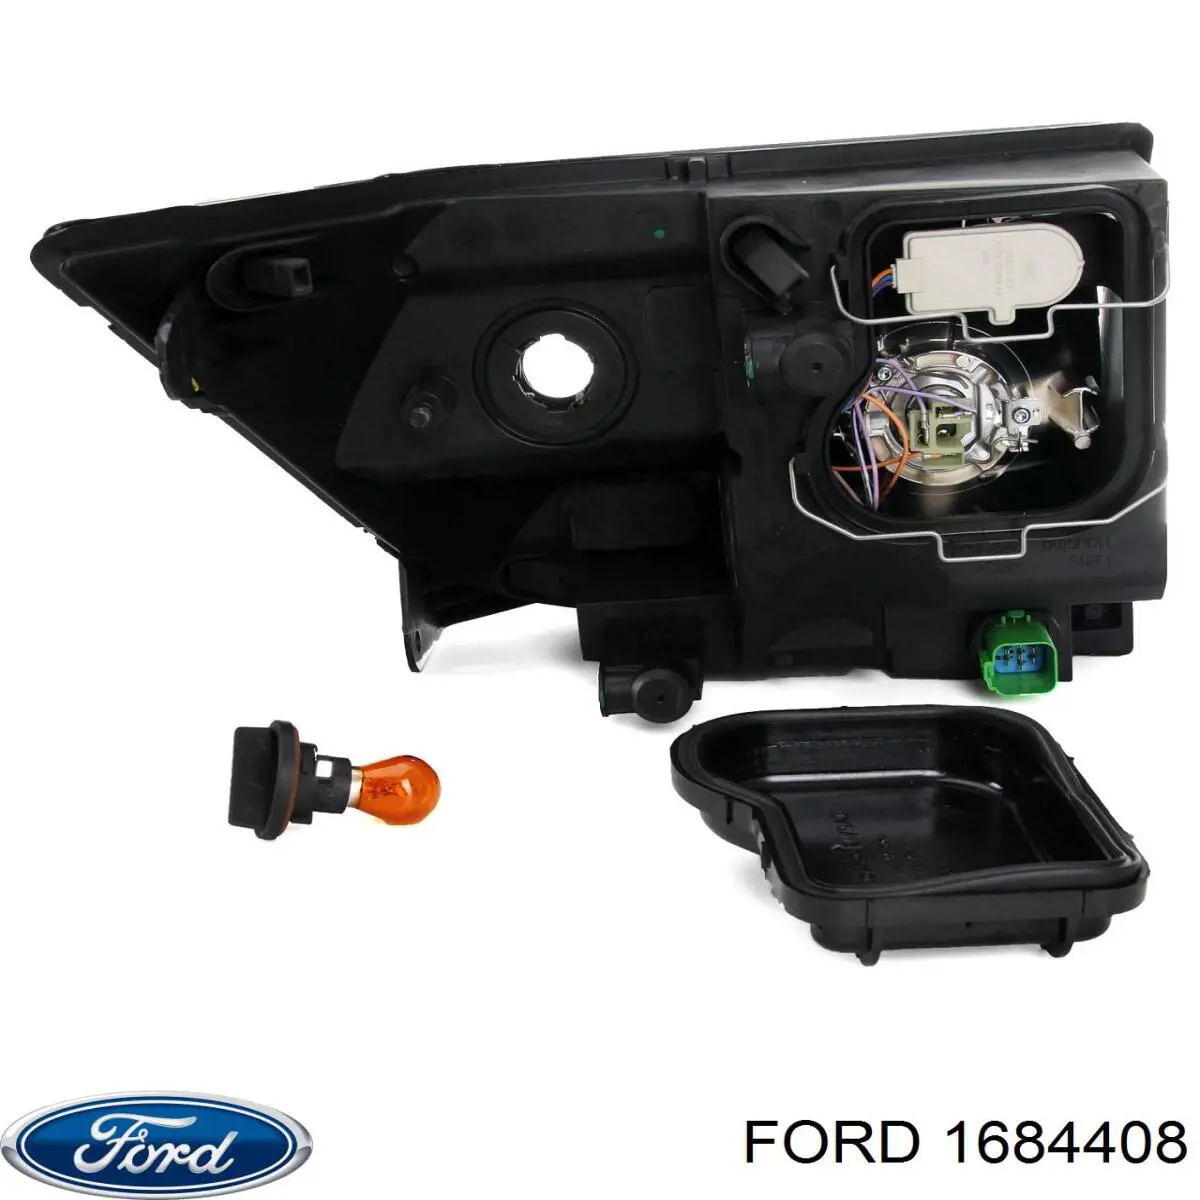 1684408 Ford фара права